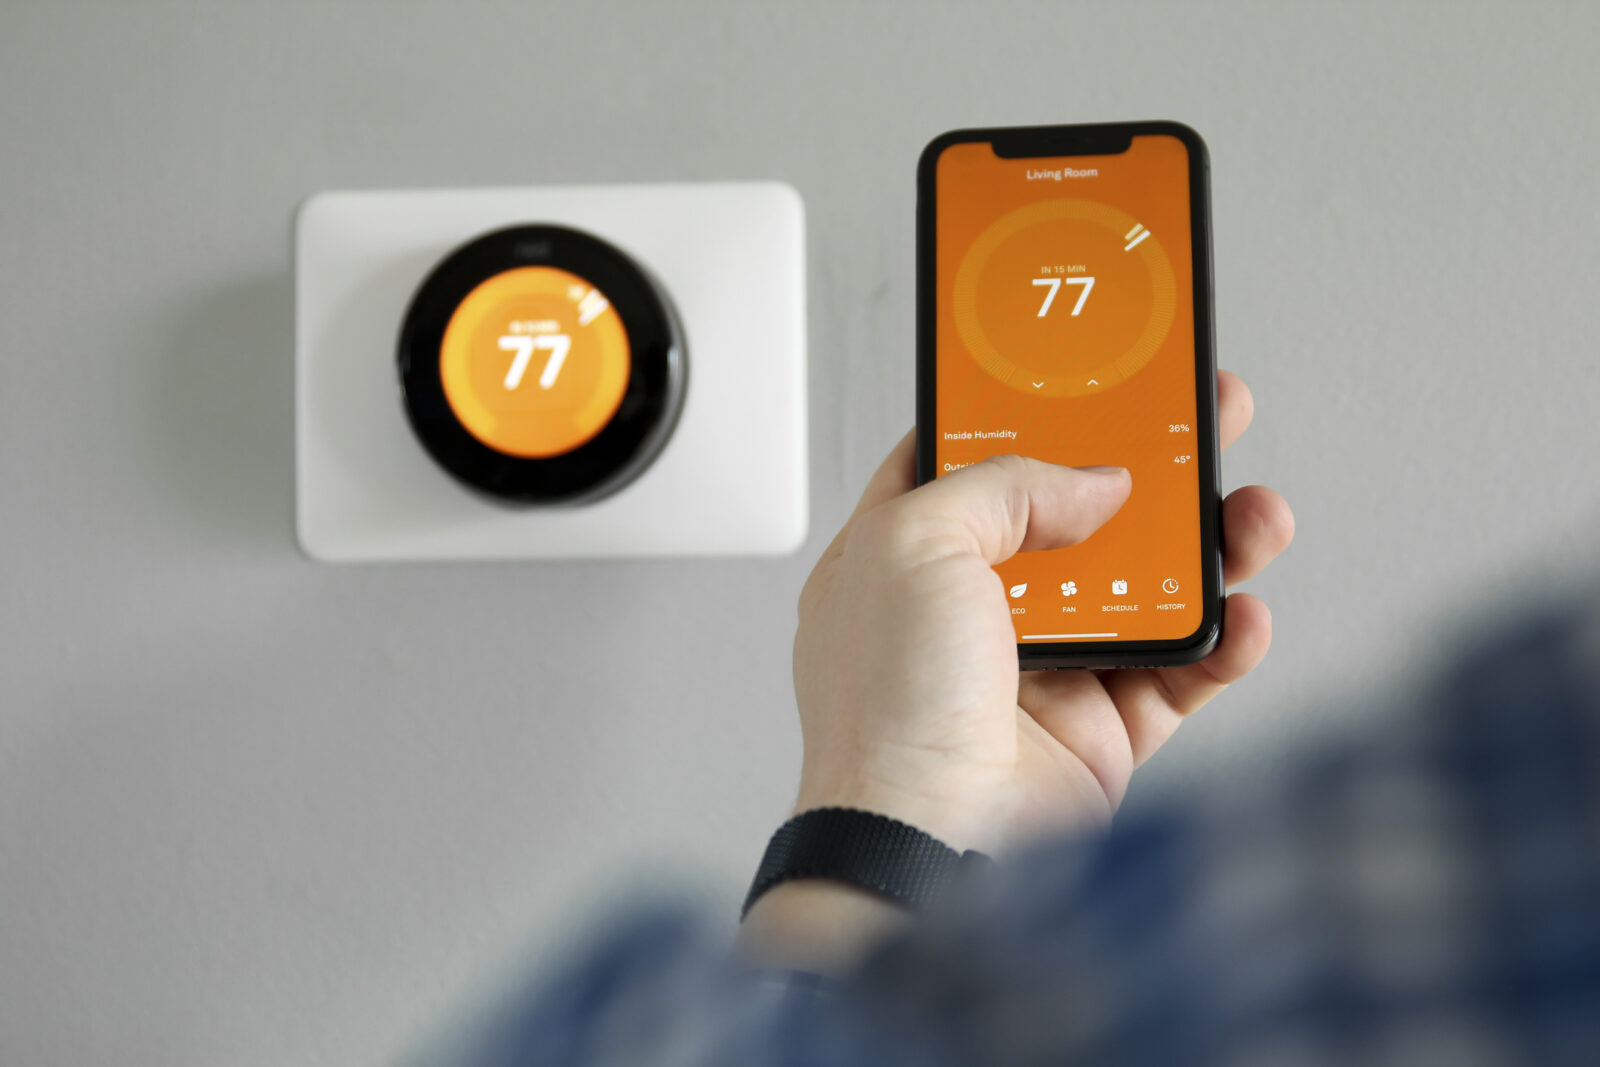 Man uses a mobile phone with smart home app to adjust temperature in home